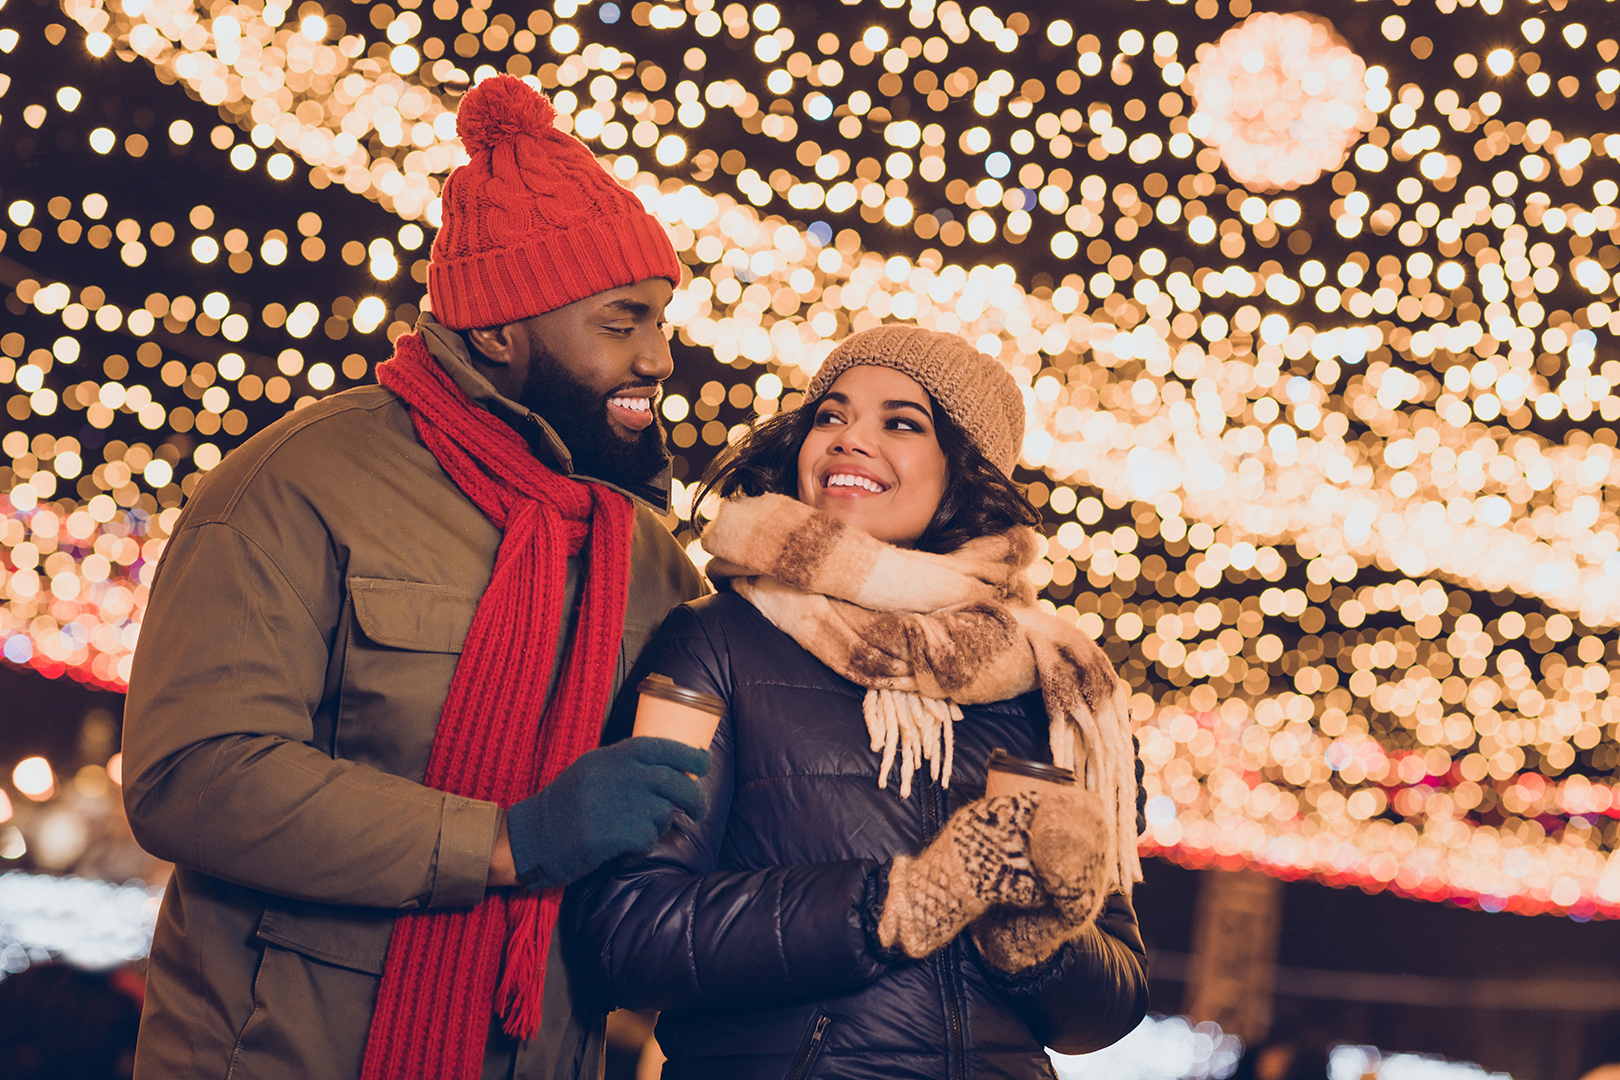 How to Blend Holiday Traditions in a New Relationship